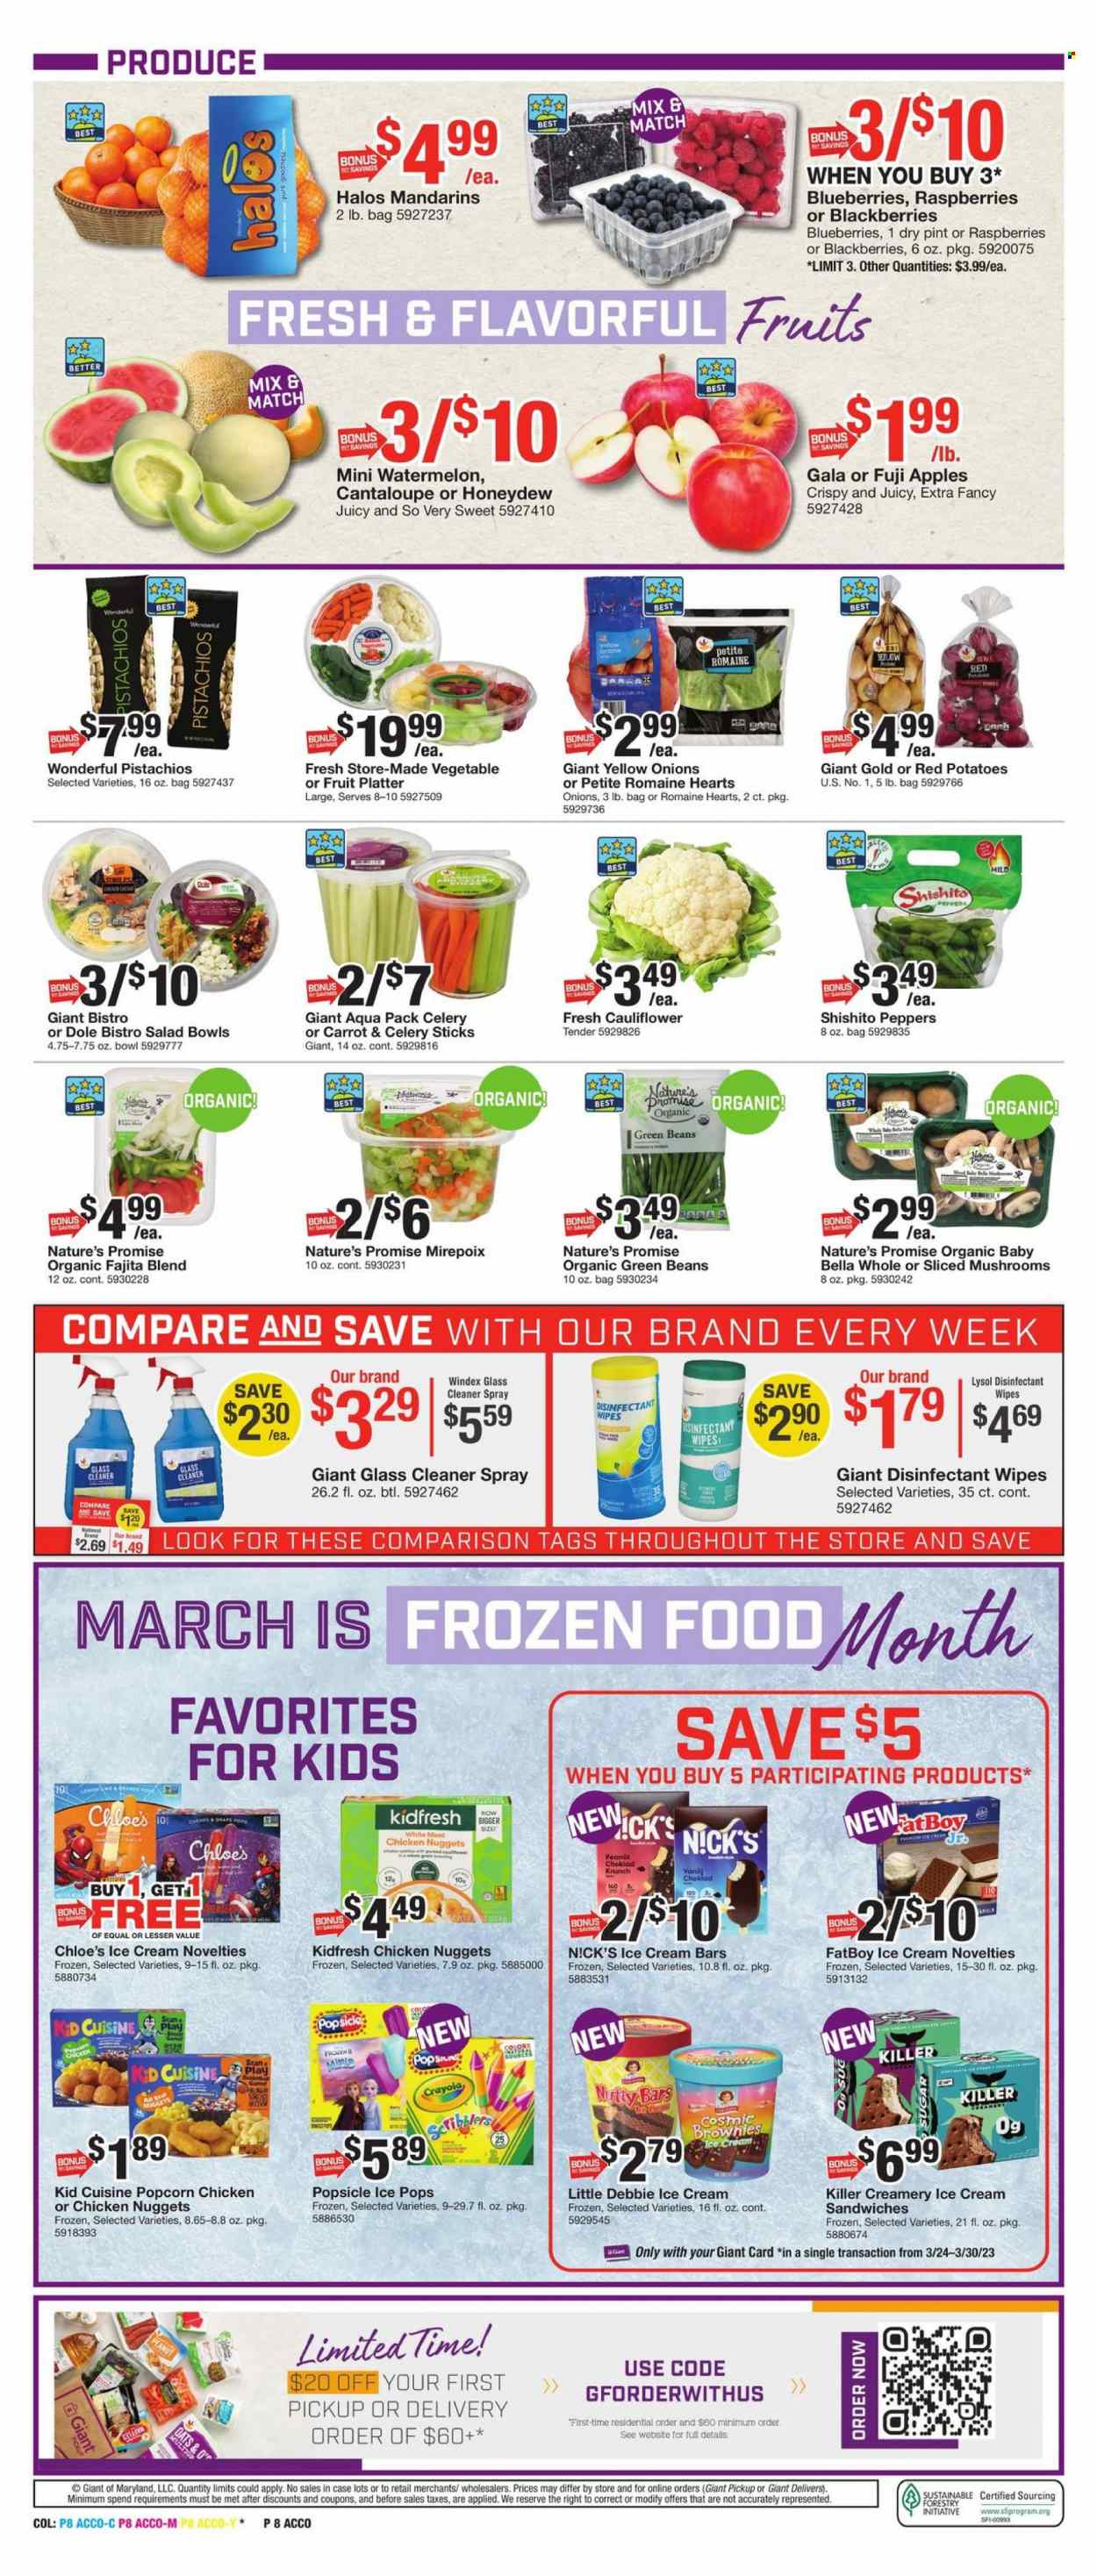 thumbnail - Giant Food Flyer - 03/24/2023 - 03/30/2023 - Sales products - mushrooms, Nature’s Promise, brownies, cantaloupe, cauliflower, green beans, potatoes, Dole, peppers, red potatoes, apples, blackberries, blueberries, Gala, mandarines, watermelon, honeydew, cherries, Fuji apple, nuggets, chicken nuggets, fajita mix, ice cream, ice cream bars, ice cream sandwich, Nick's Ice Cream, popcorn, celery sticks, sugar, oats, pistachios, wipes, Windex, cleaner, desinfection, Lysol, glass cleaner, salad bowl, bowl, platters, crayons, plant seeds. Page 10.